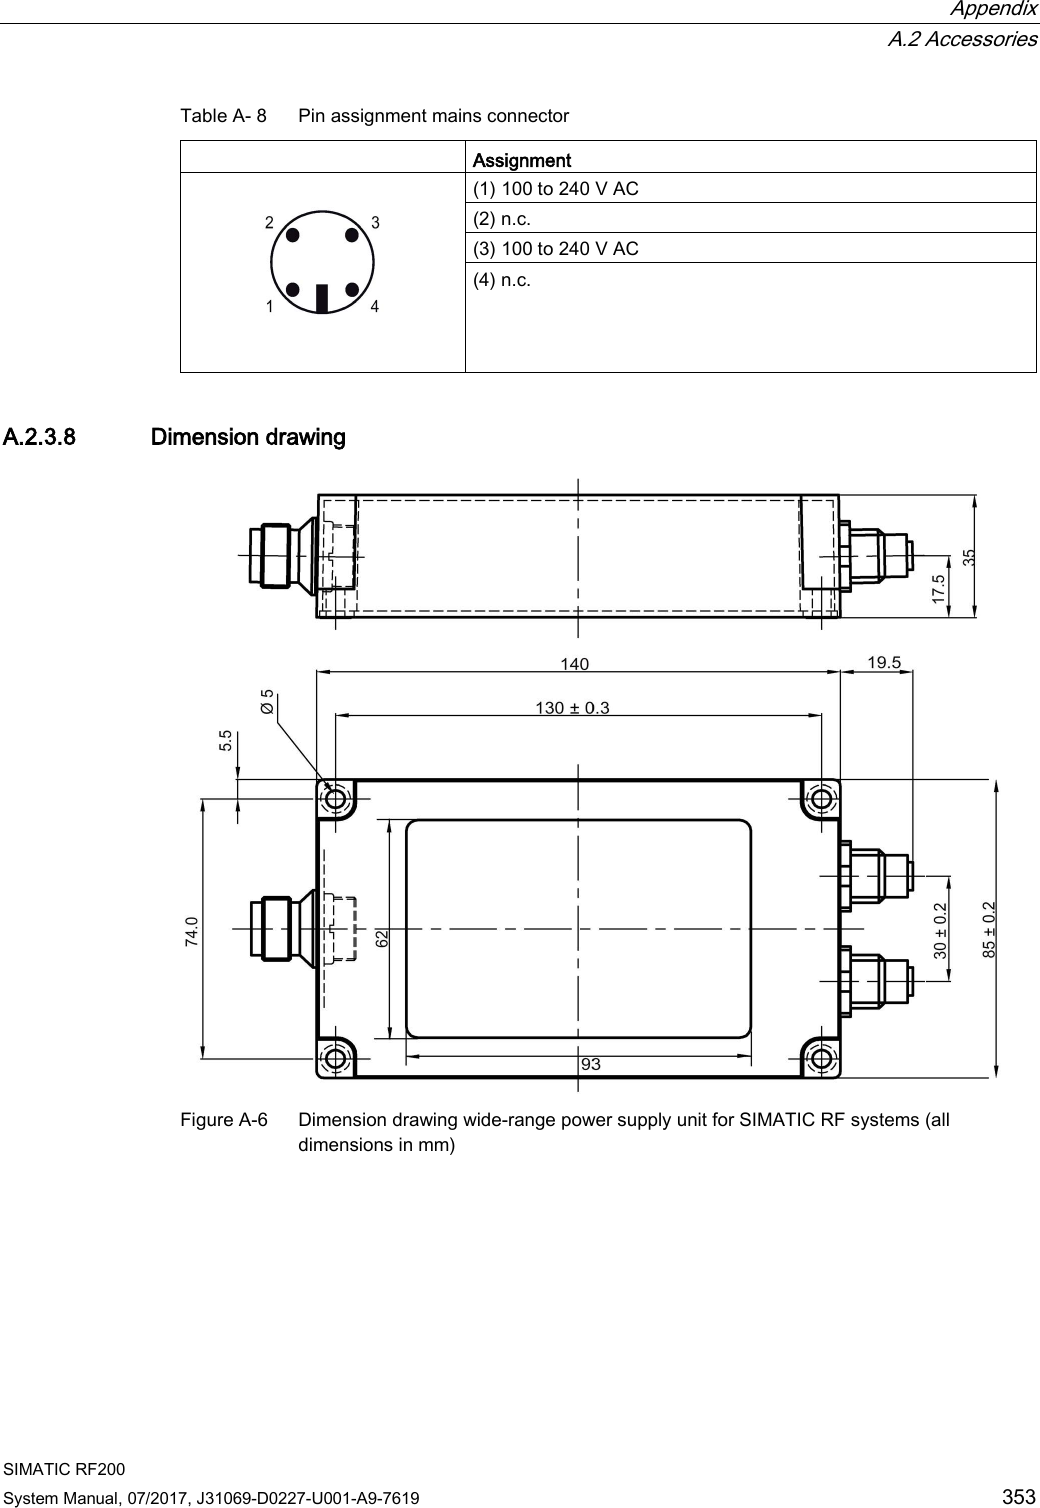  Appendix  A.2 Accessories SIMATIC RF200 System Manual, 07/2017, J31069-D0227-U001-A9-7619 353 Table A- 8  Pin assignment mains connector  Assignment     (1) 100 to 240 V AC (2) n.c. (3) 100 to 240 V AC (4) n.c. A.2.3.8 Dimension drawing  Figure A-6  Dimension drawing wide-range power supply unit for SIMATIC RF systems (all dimensions in mm) 